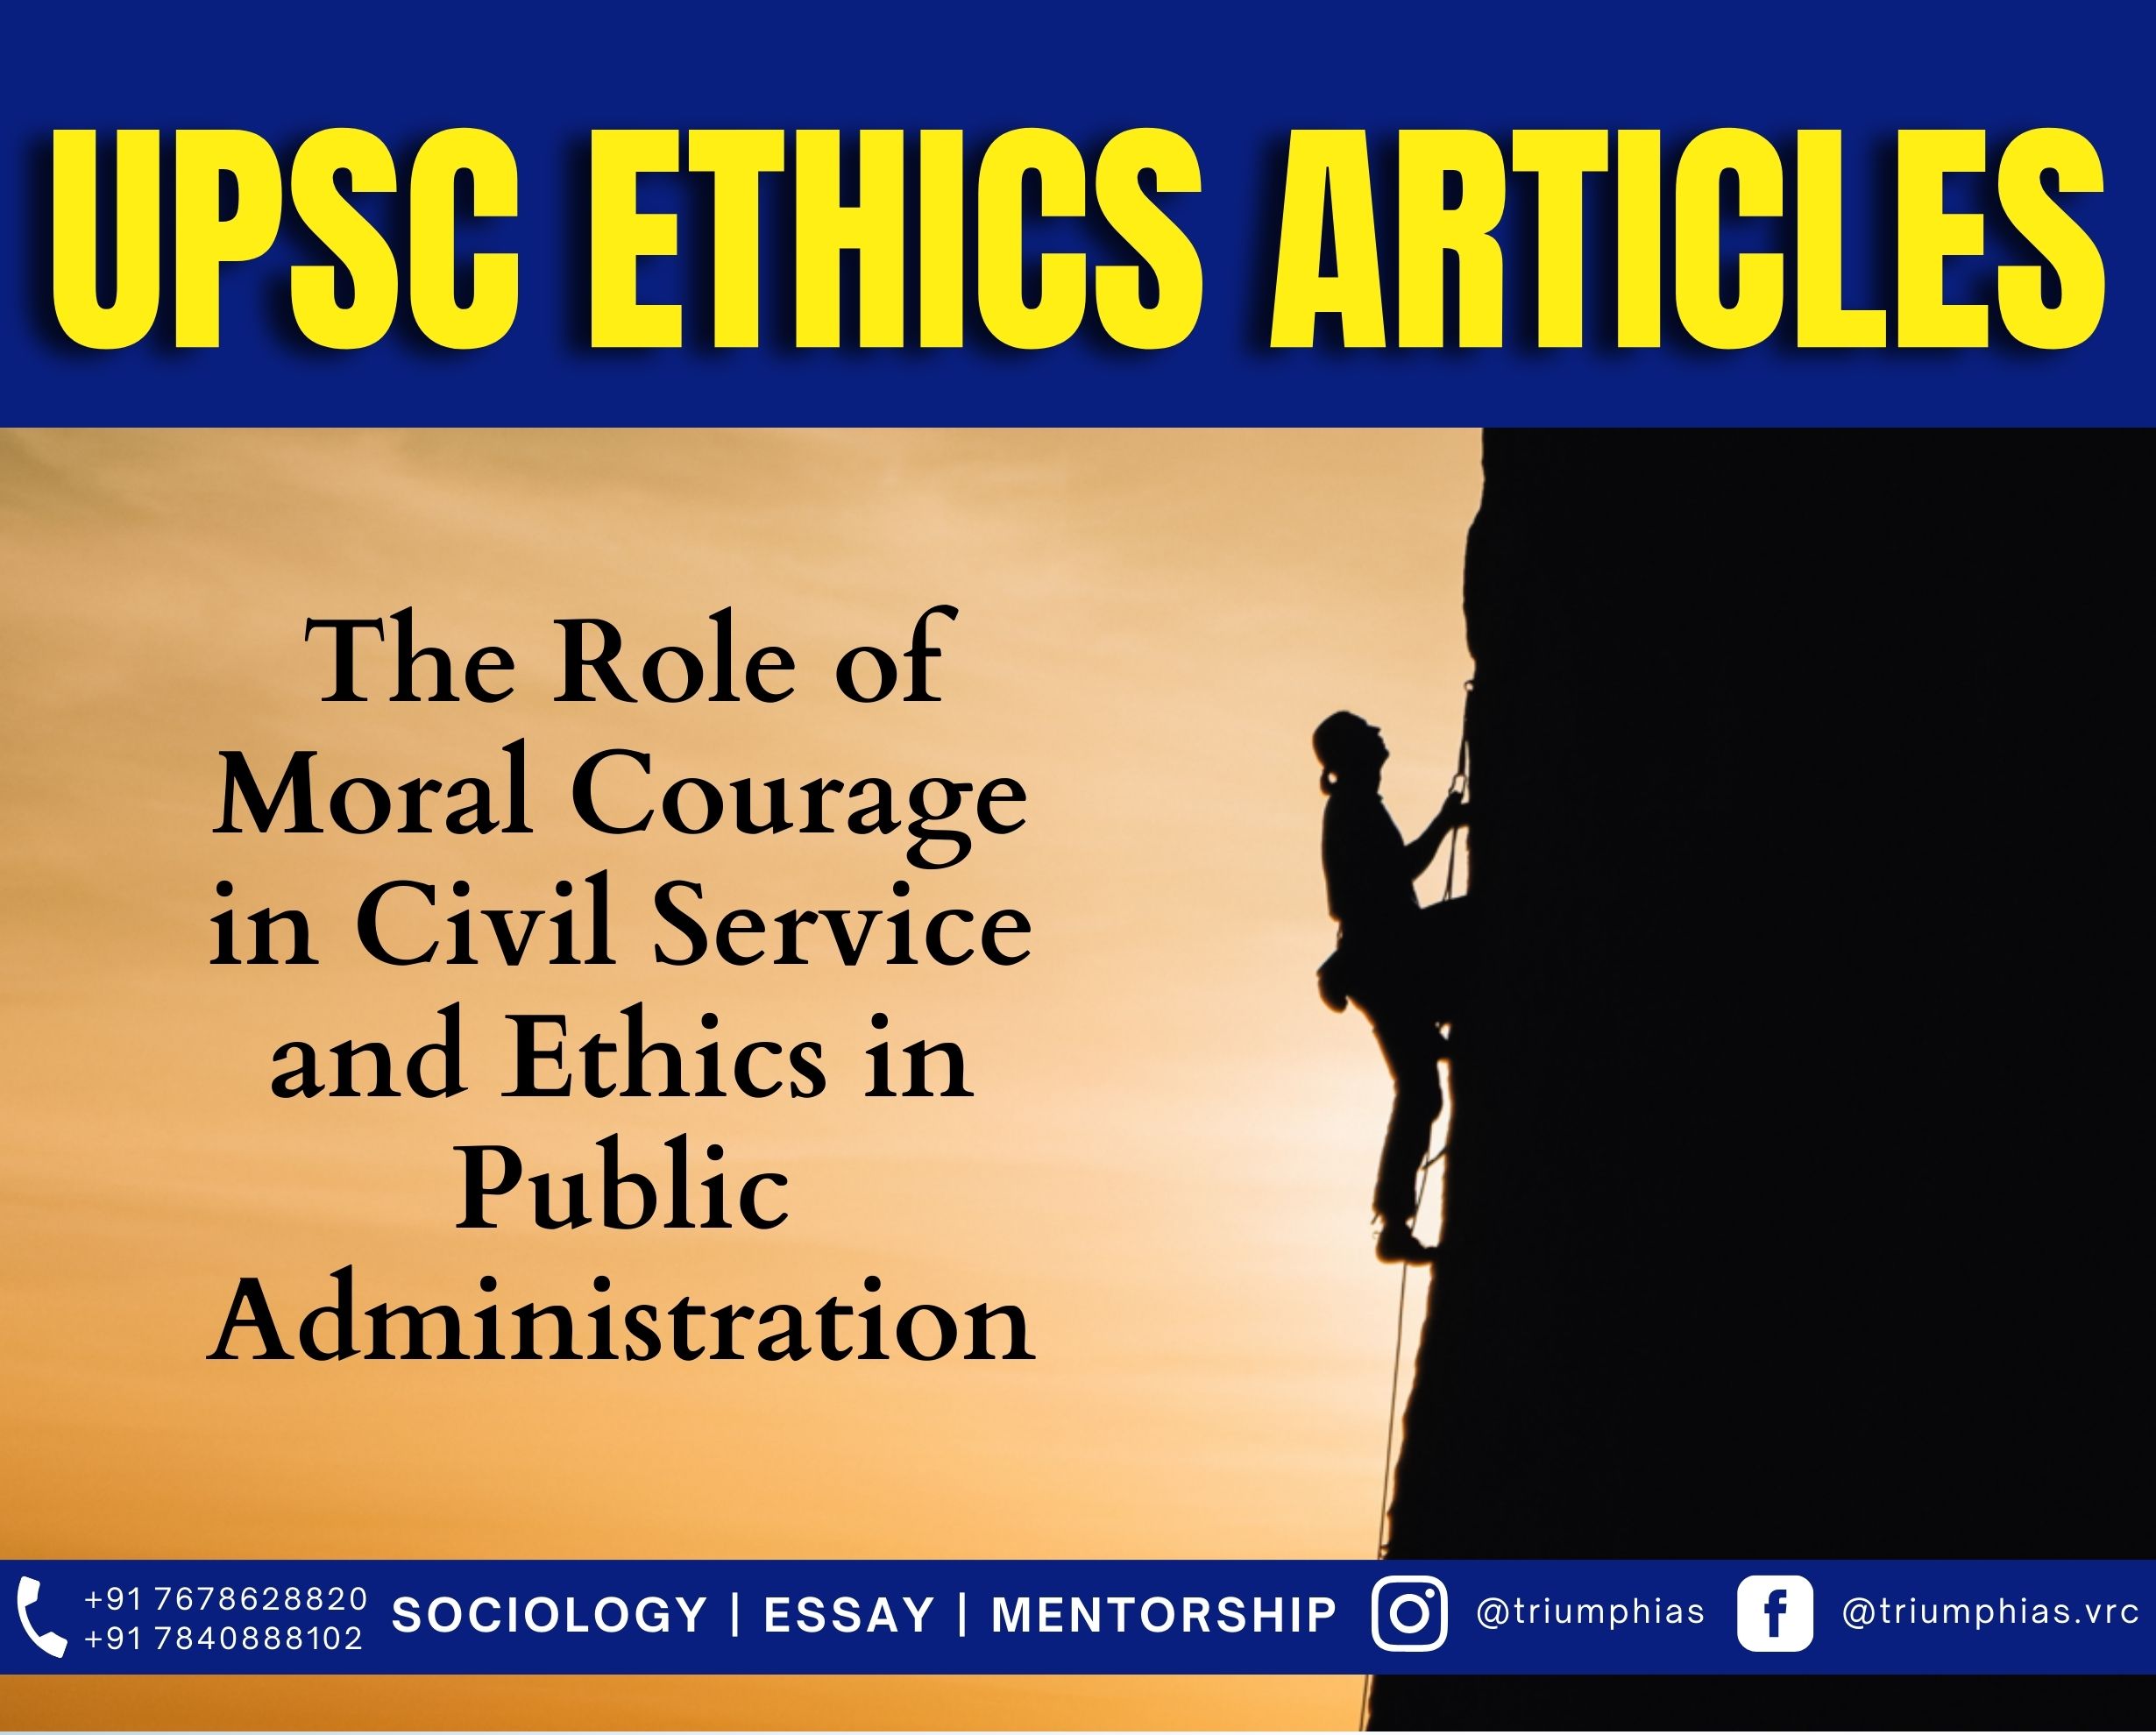 The Role of Moral Courage in Civil Service and Ethics in Public